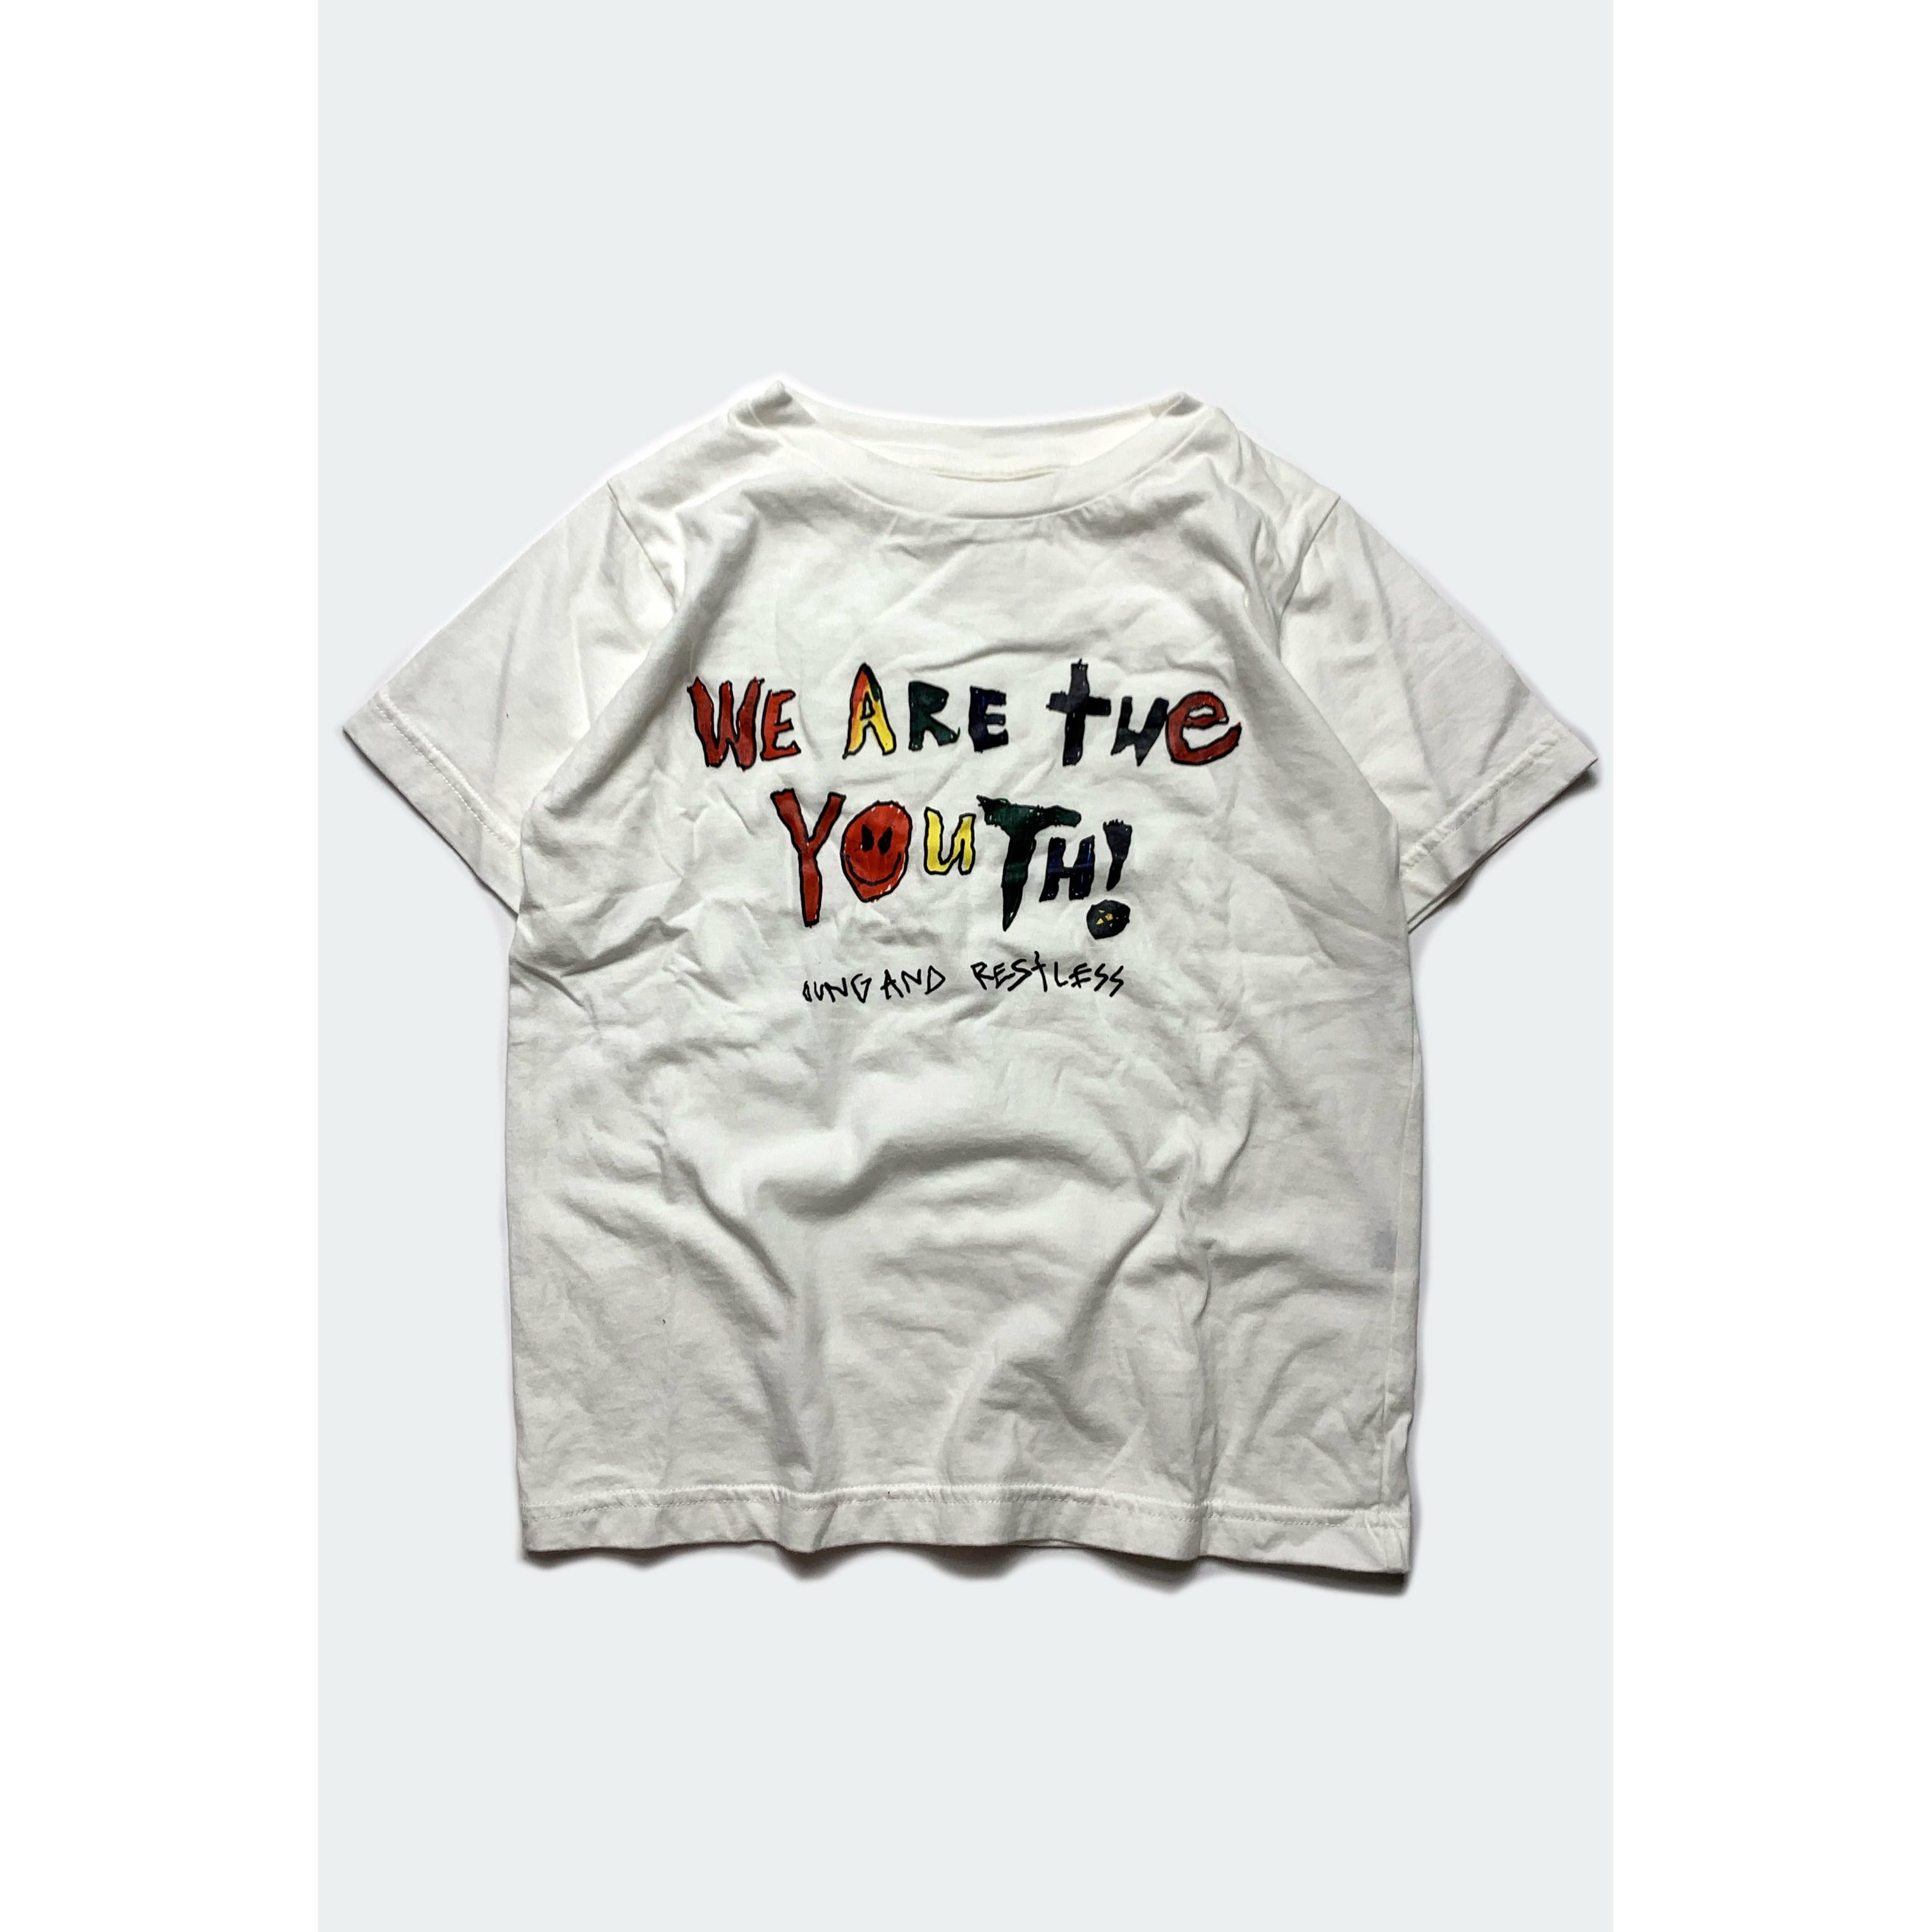 We Are the Youth Tee